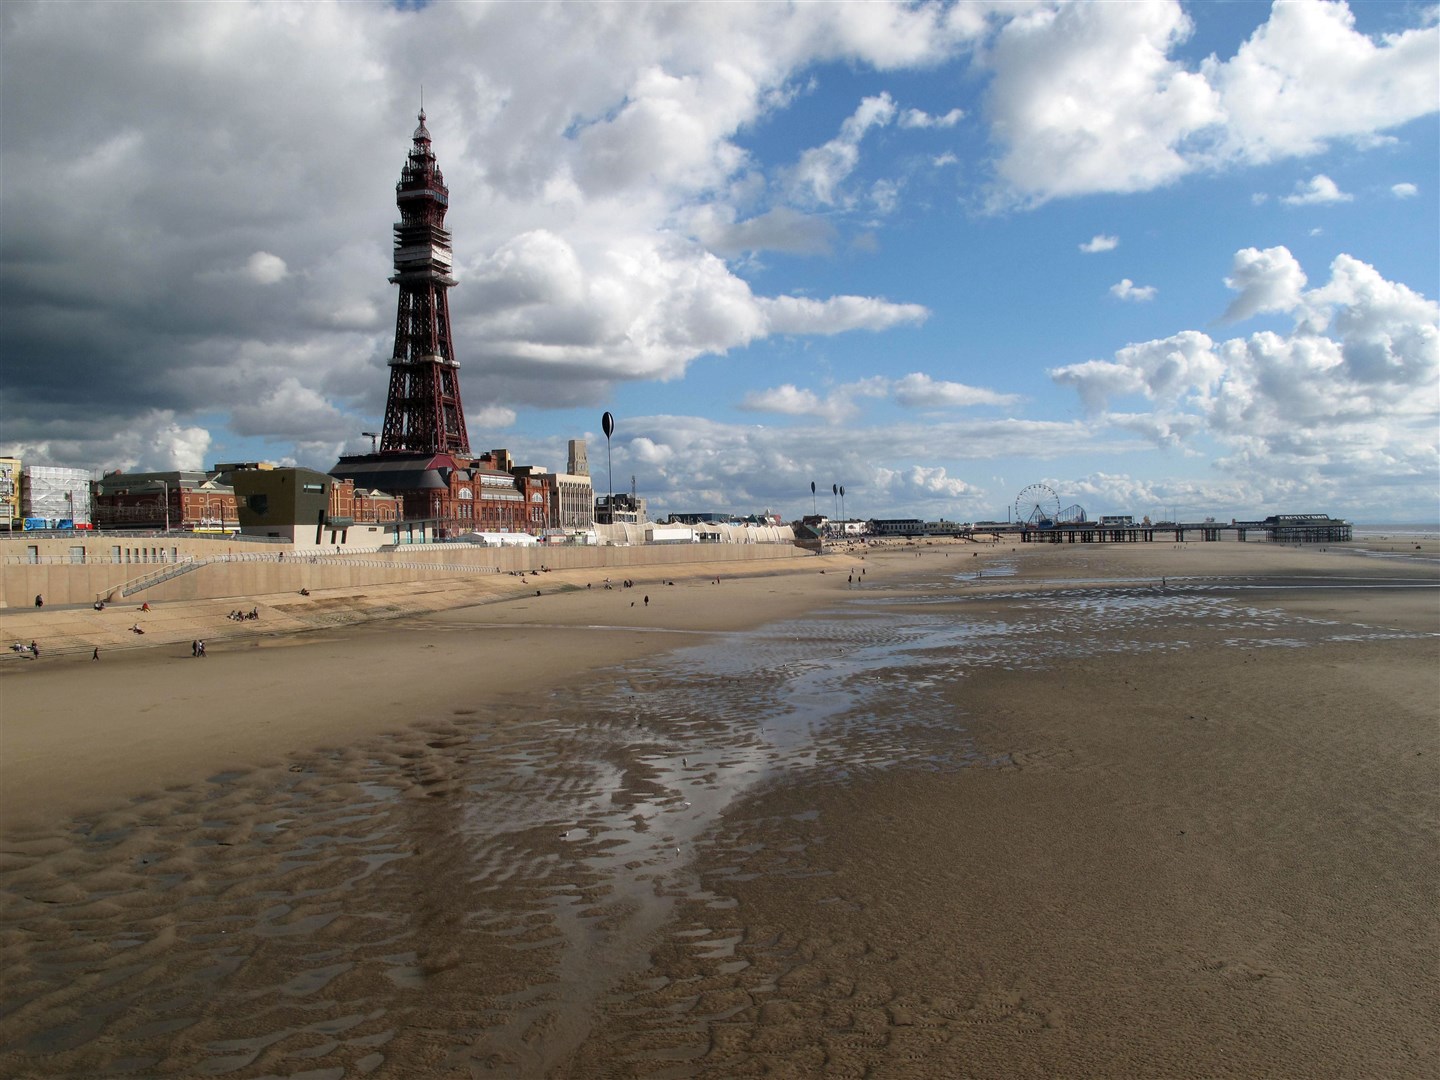 Non-essential travel to Blackpool and other high risk areas is strongly not recommended after strong links in infections recorded in parts of Scotland.